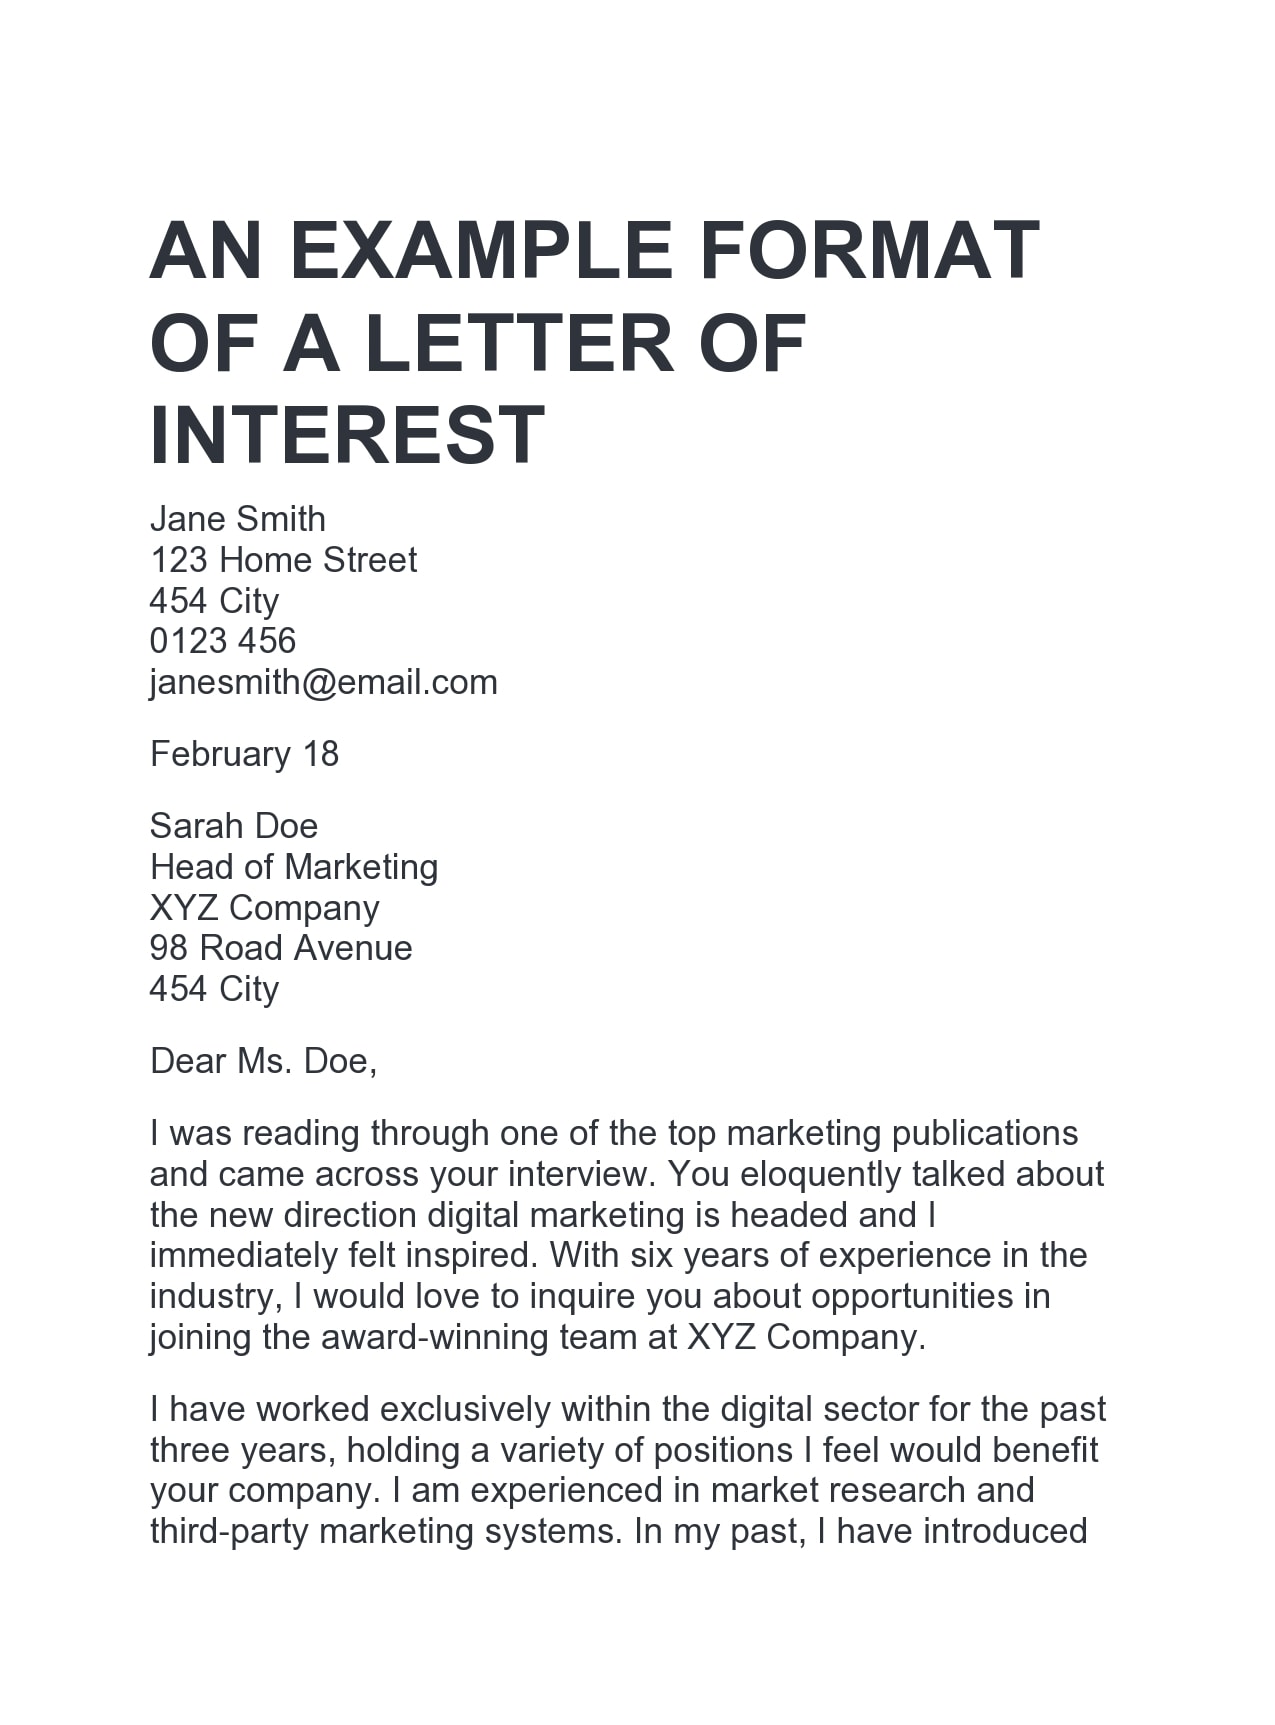 30 Editable Letter of Interest for a Job Templates ...